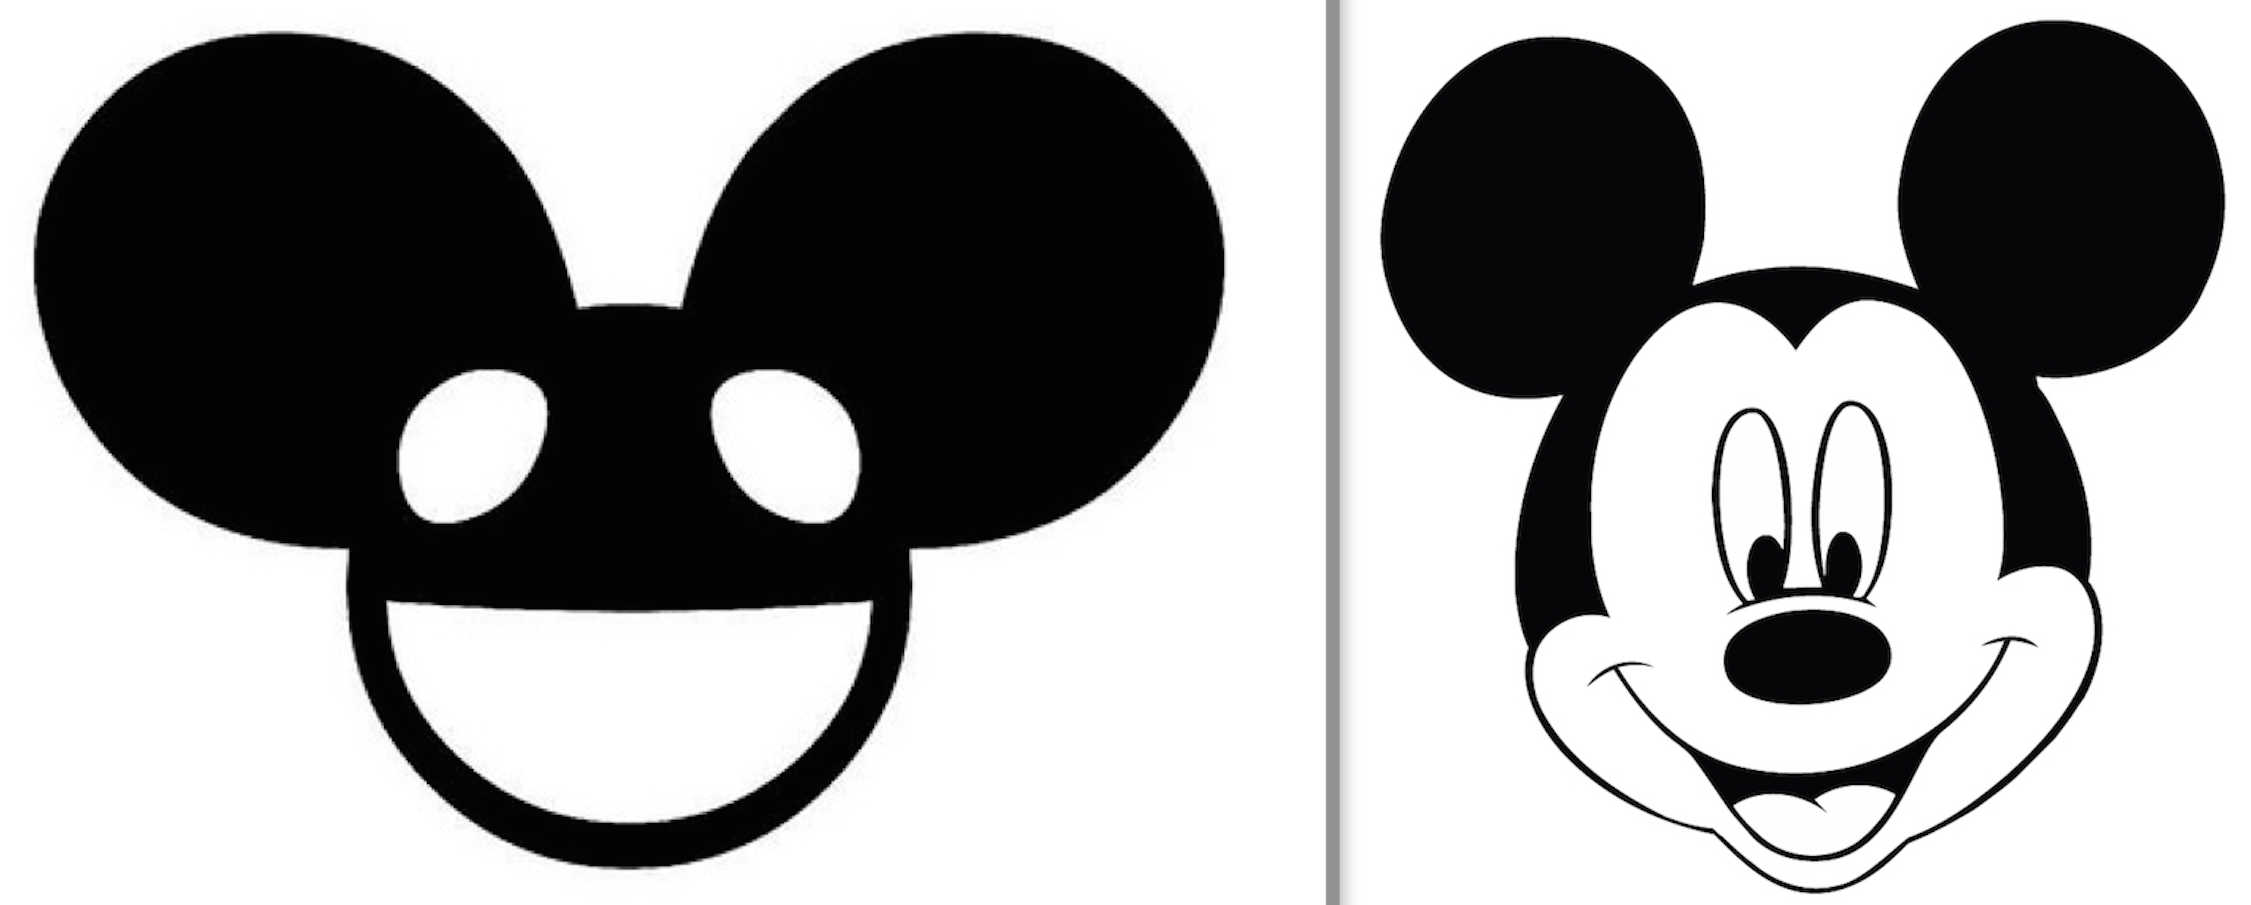 Mickey Mouse Head Png.